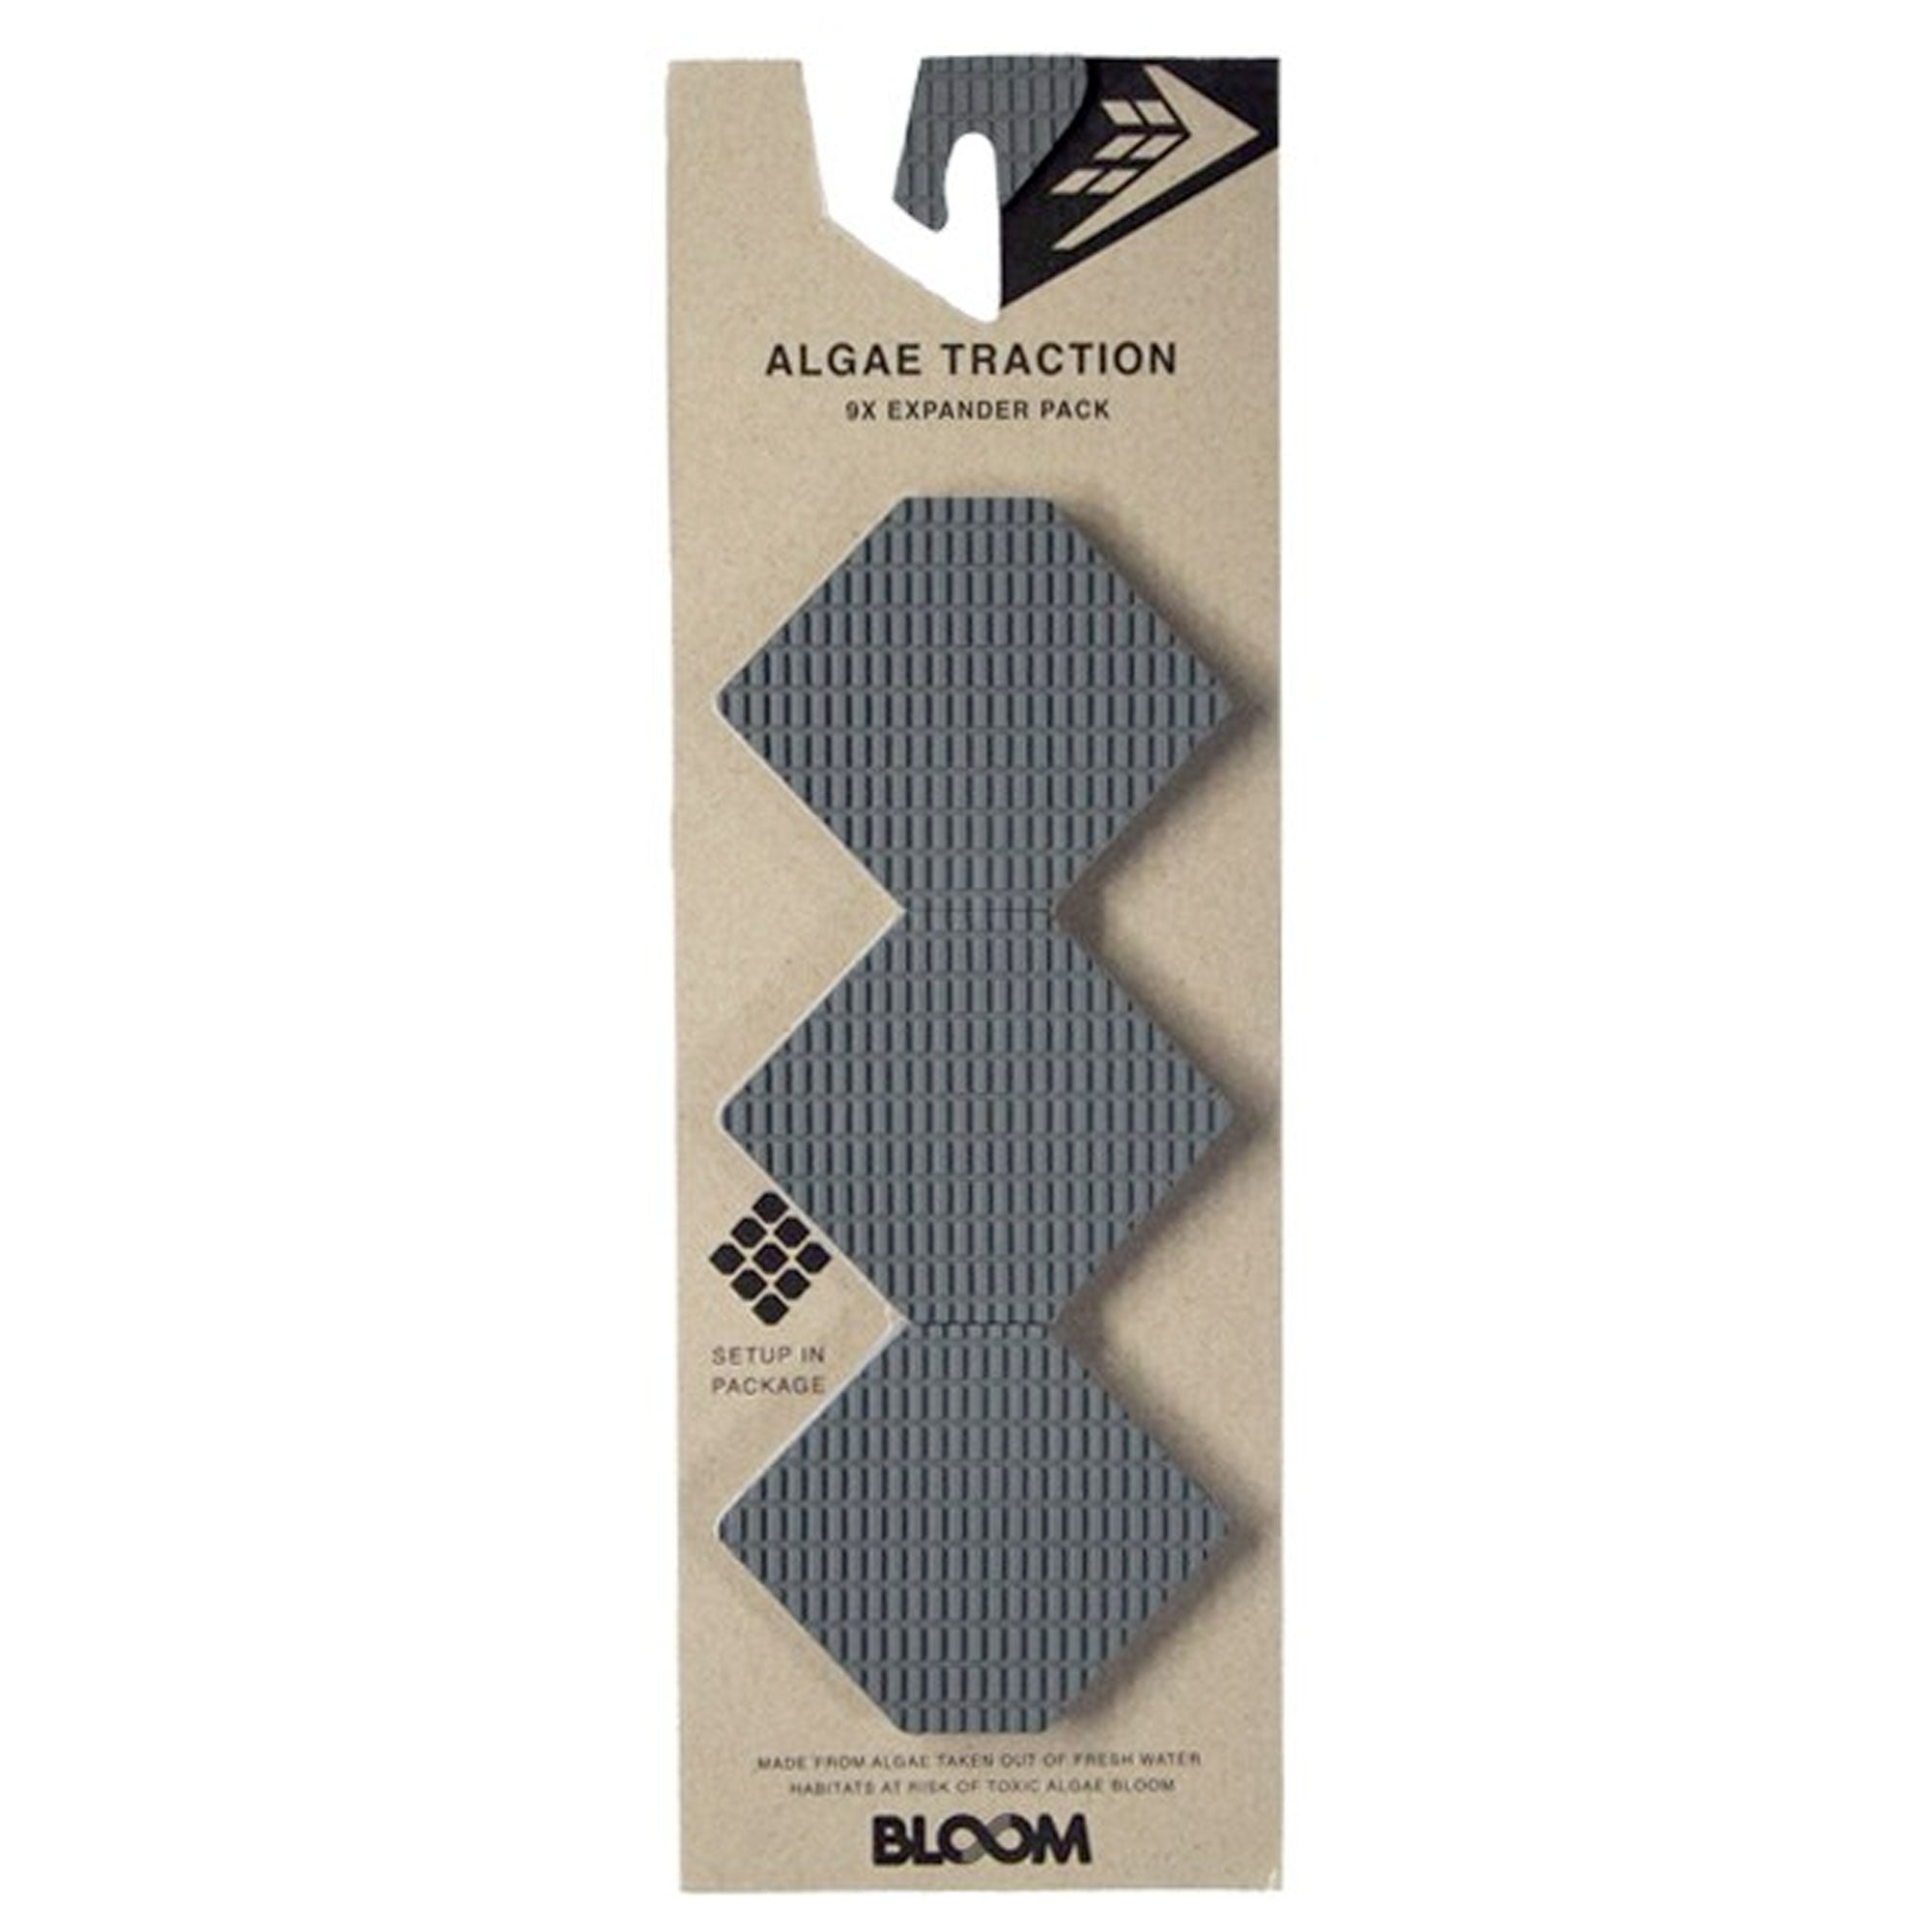 Firewire Hex Expander Traction Pad